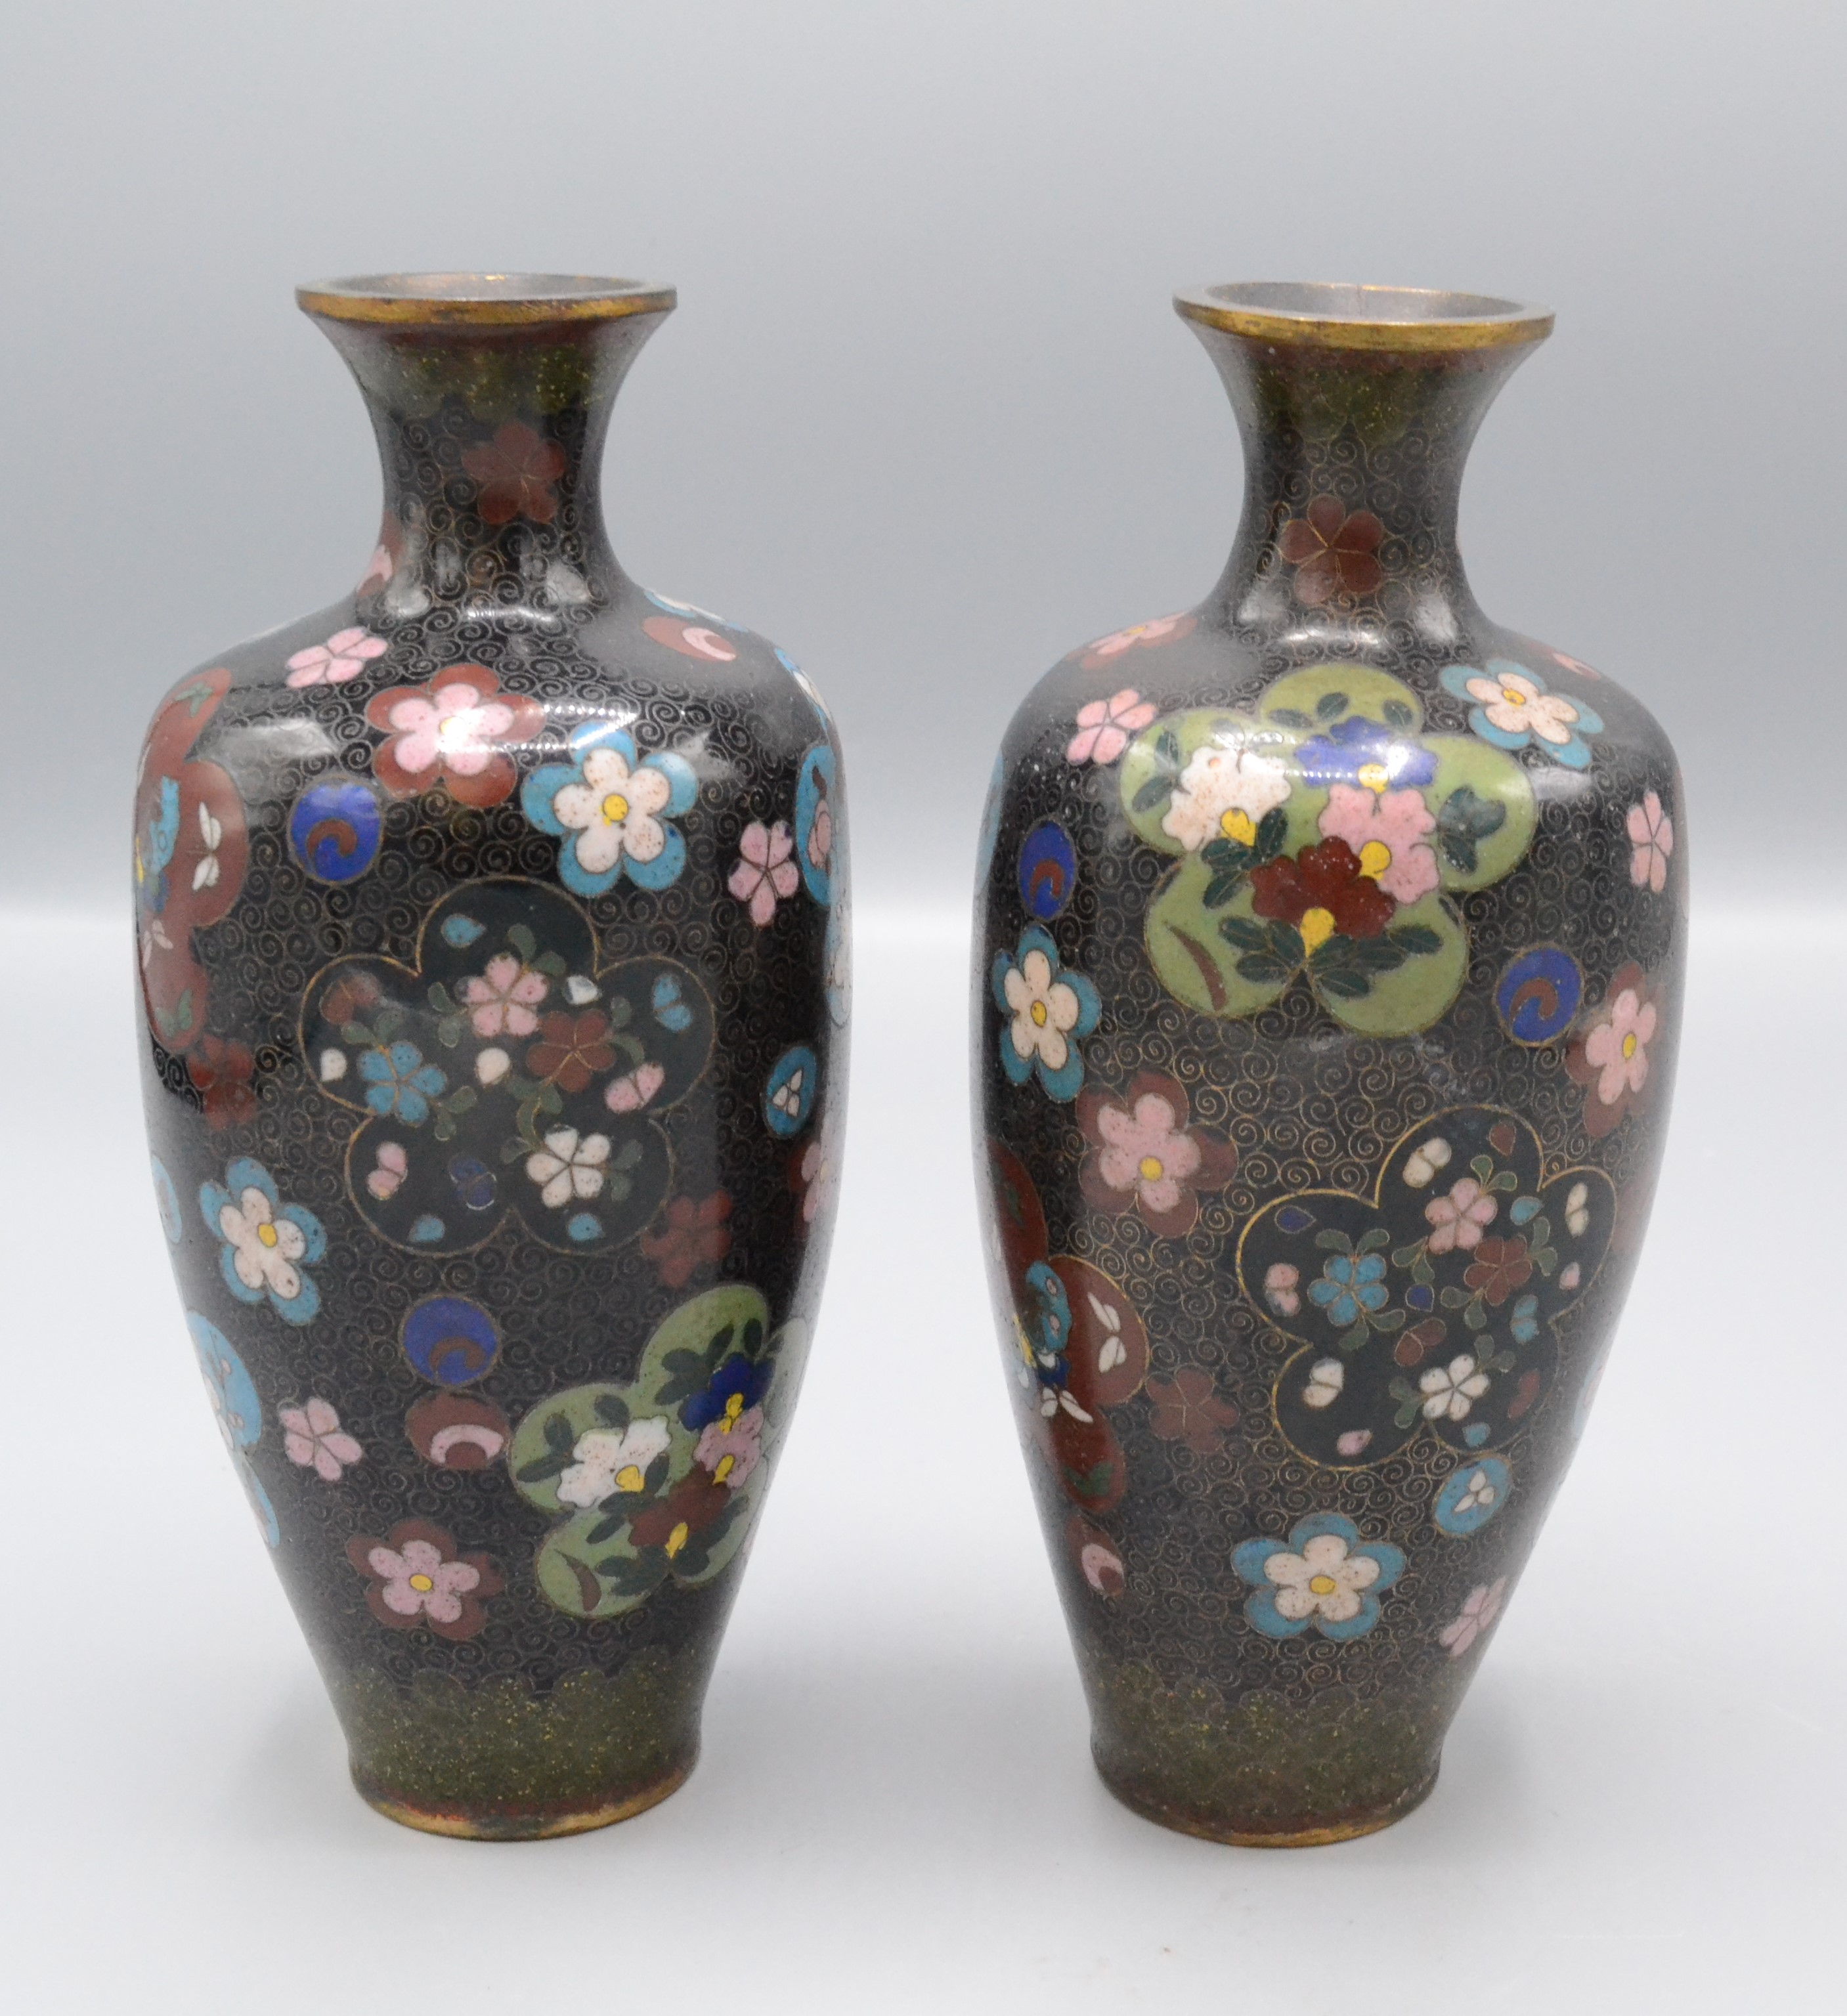 A pair of Japanese cloisonne vases, 19th century,